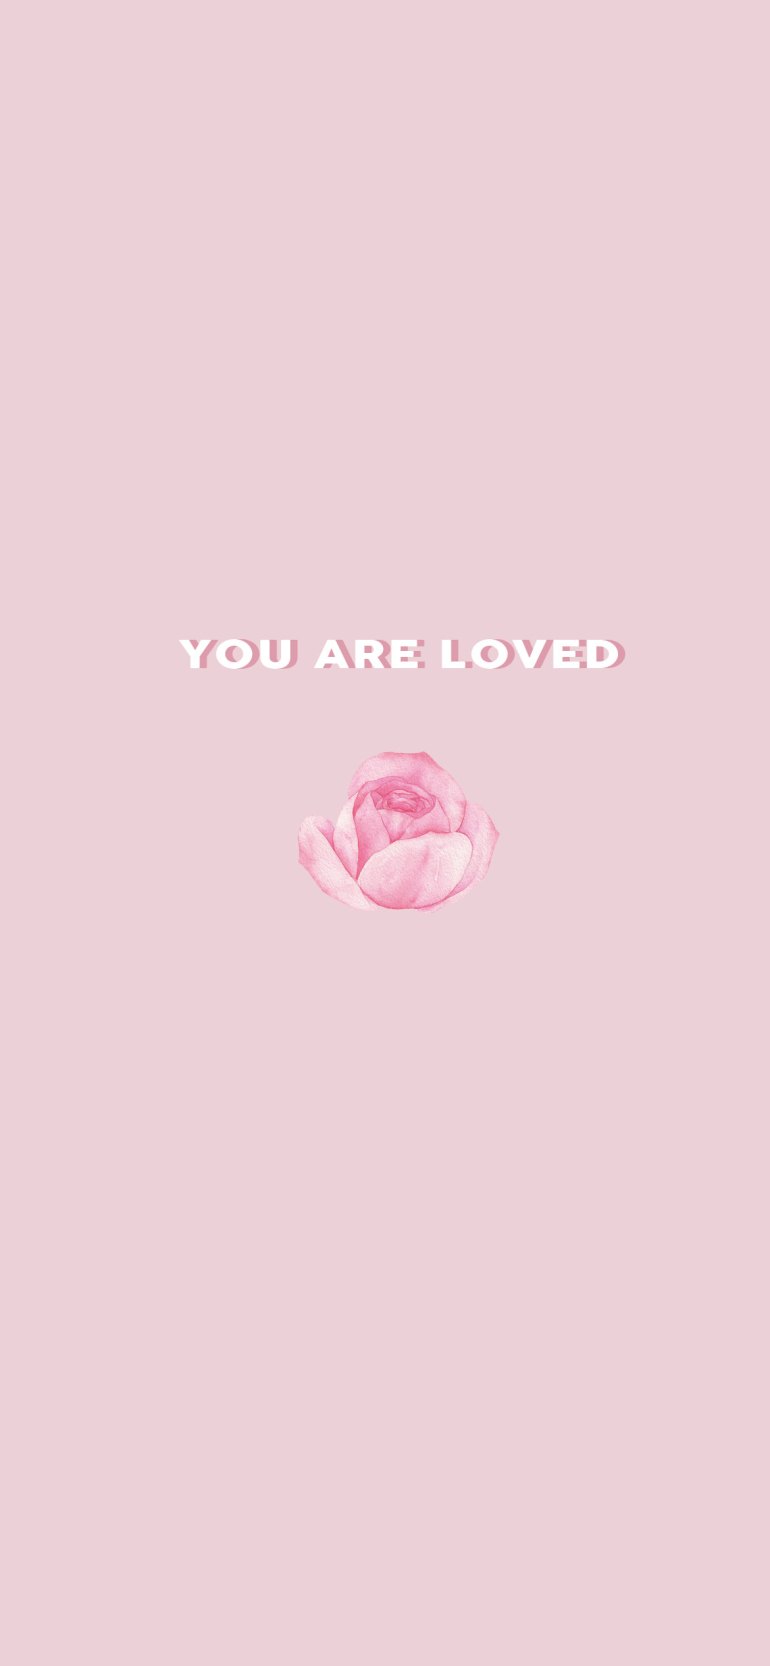 Pink Aesthetic Picture, You Are Loved Quote Wallpaper